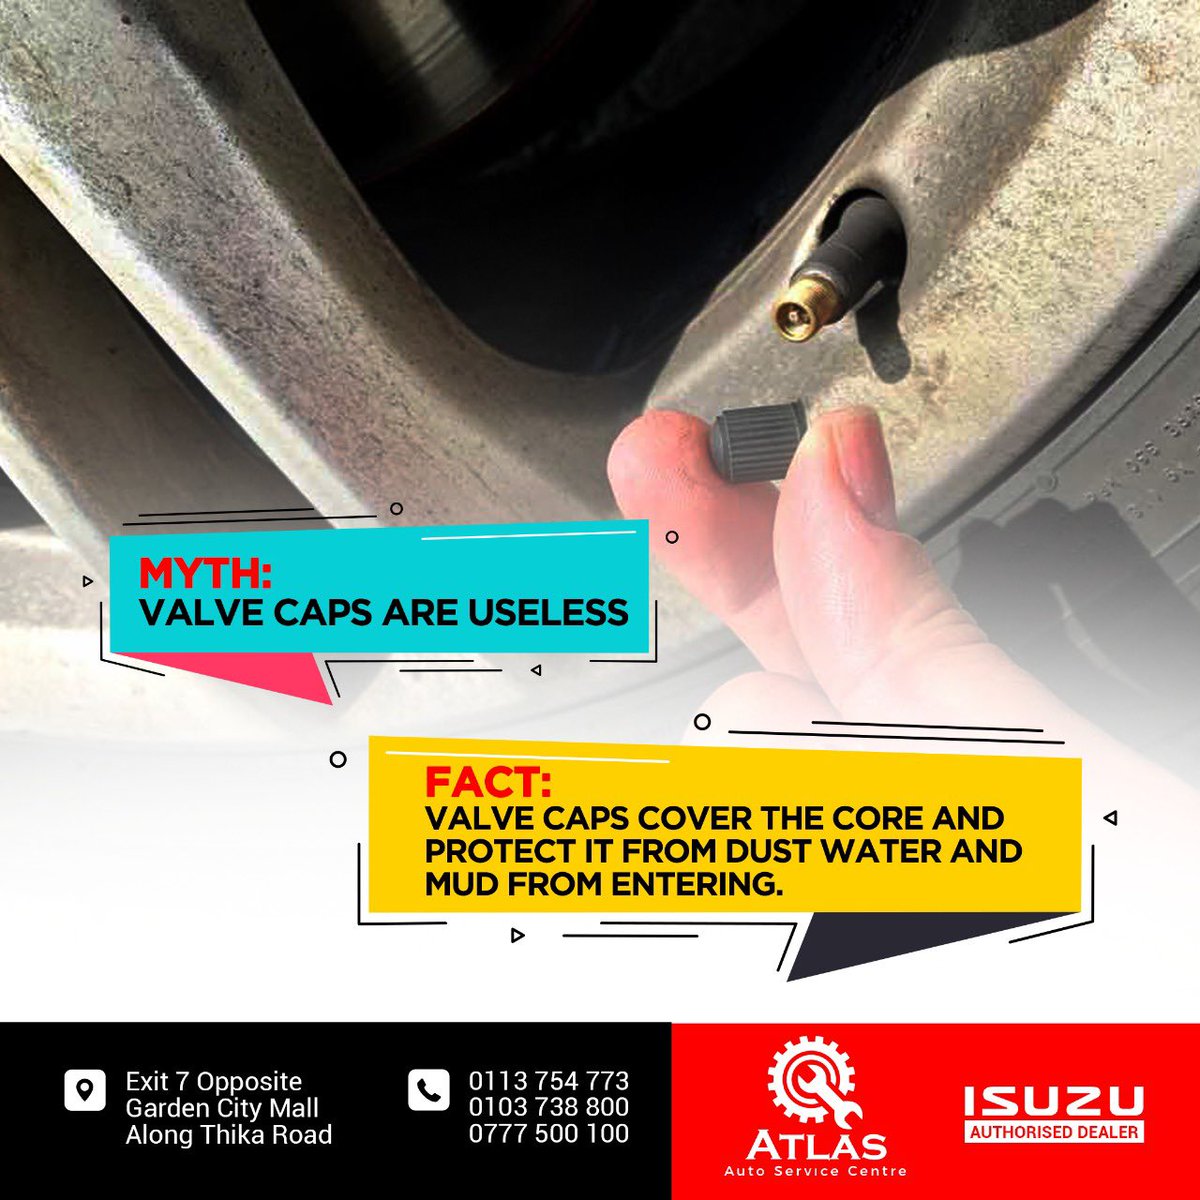 Valve caps are actually not useless! They prevent dirt moisture and even grease from entering the valve system.

Do all your tires have valve caps?

#valve #valvecaps #carcare #carexpert #atlasautoservicecentre